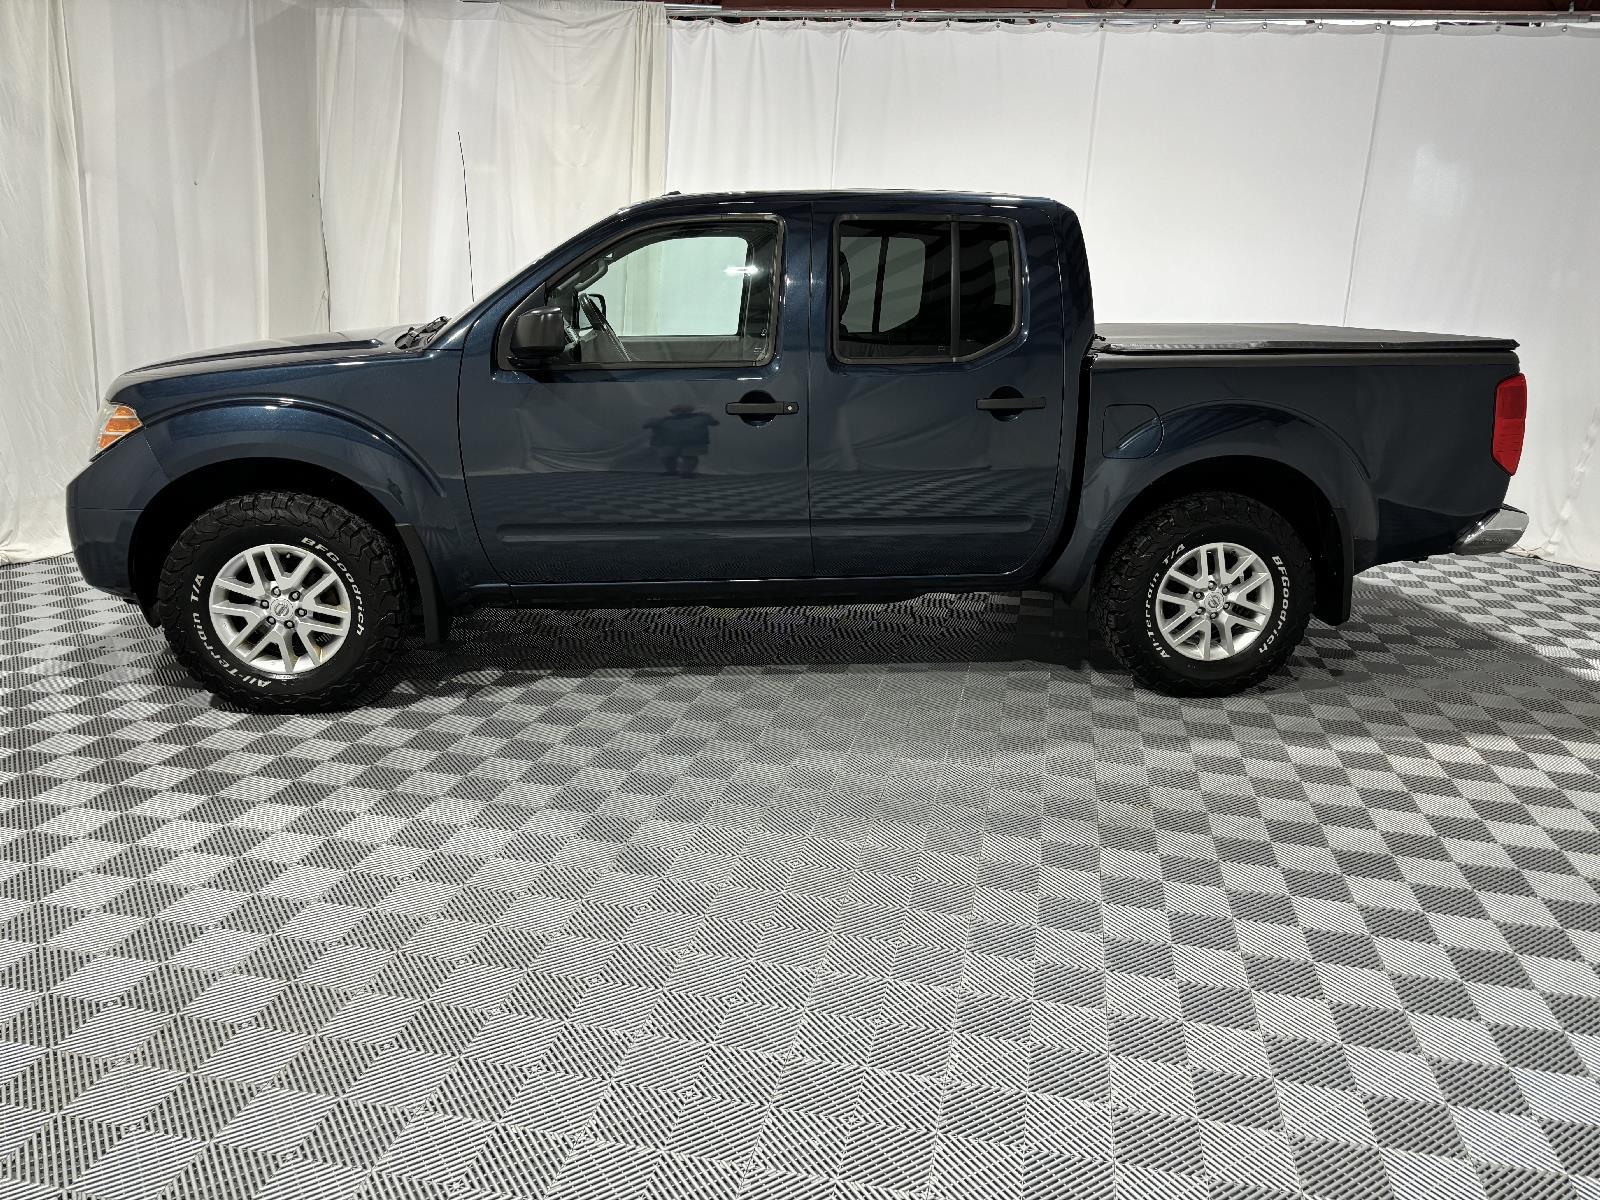 Used 2016 Nissan Frontier SV Crew Cab Truck for sale in St Joseph MO